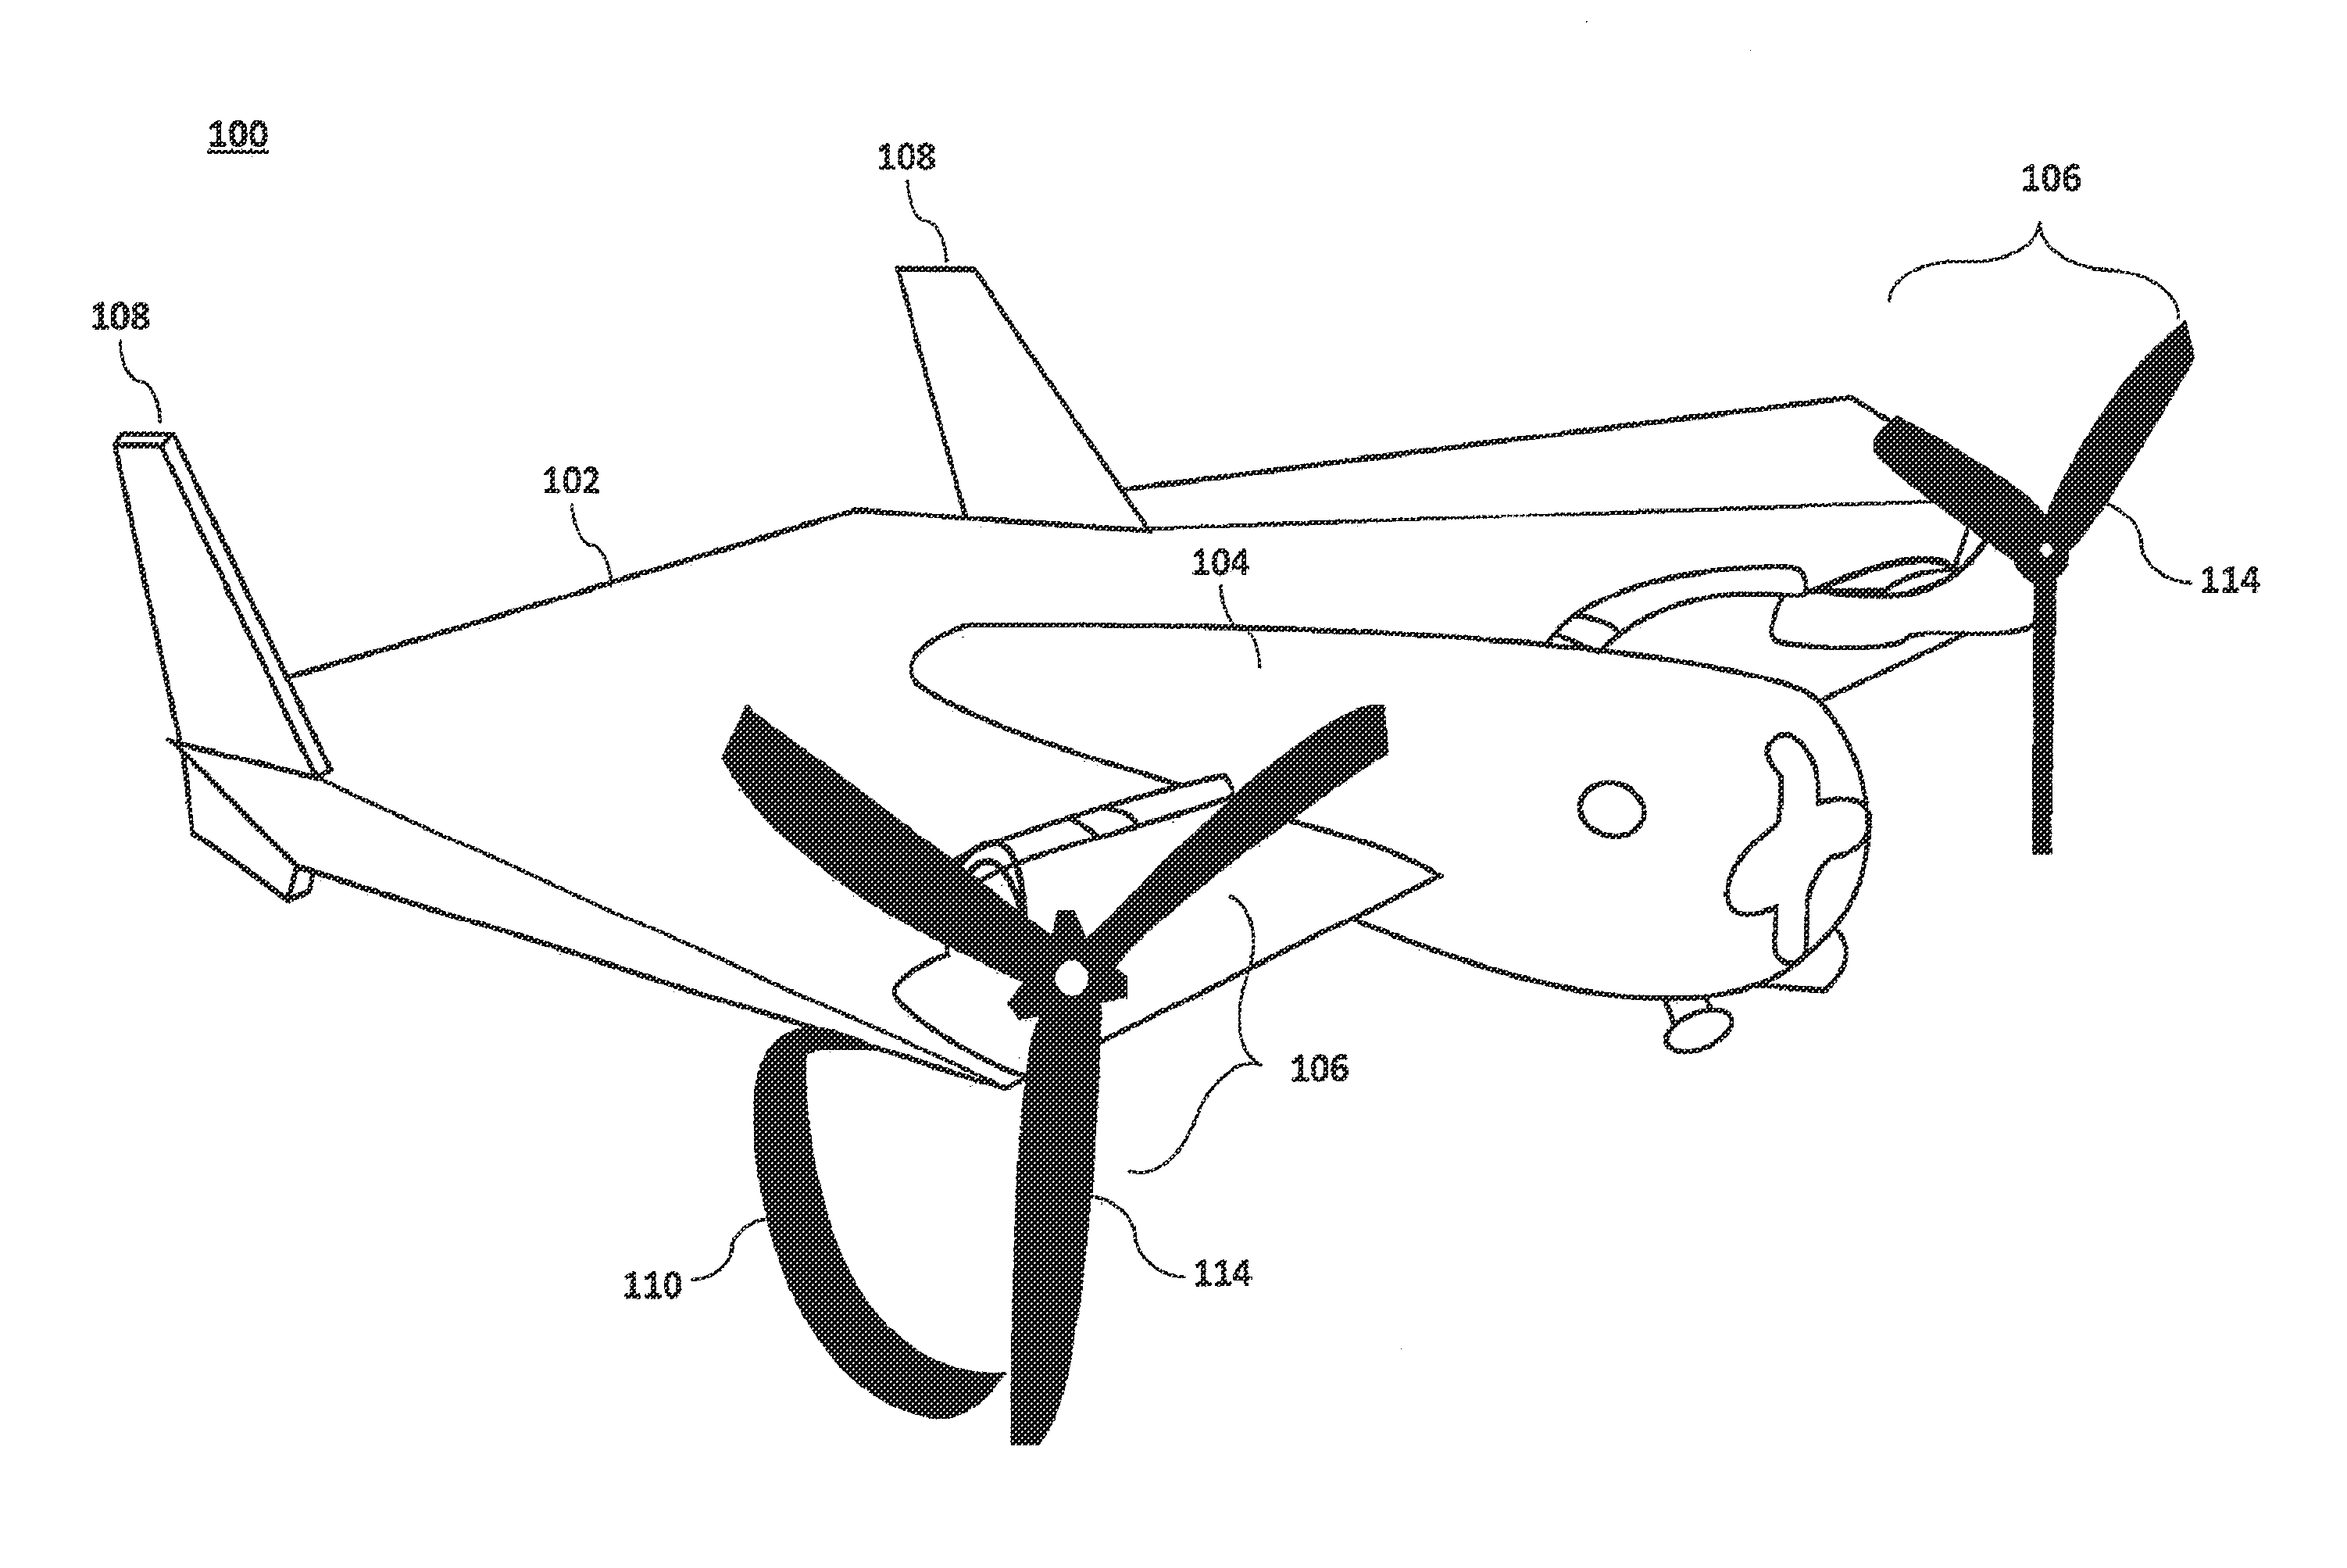 Modular miniature unmanned aircraft with vectored thrust control